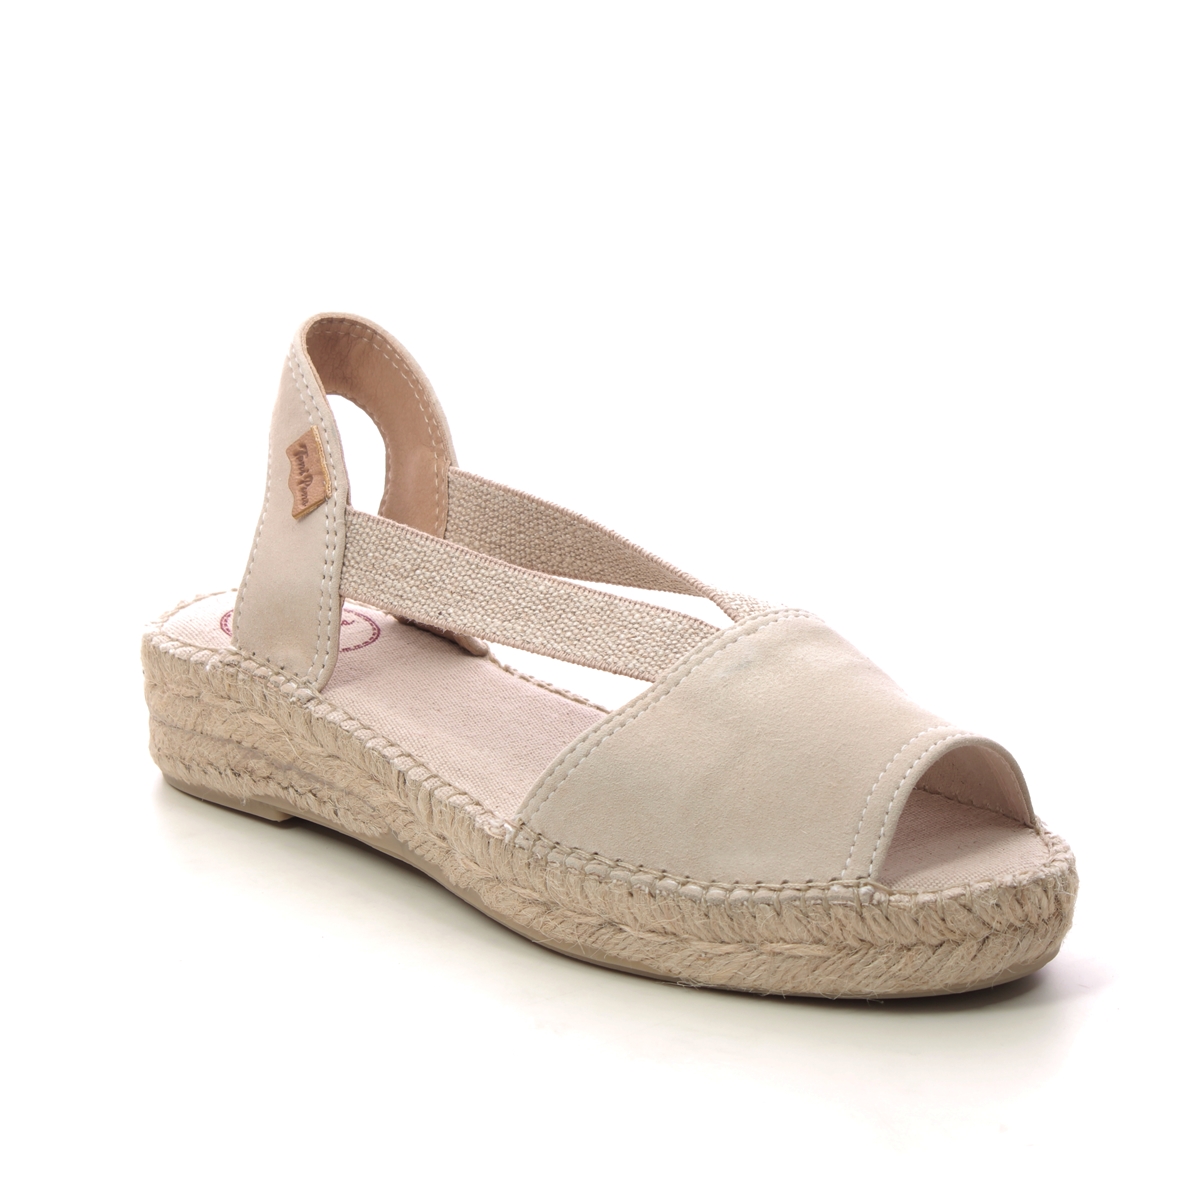 Toni Pons Ella Stone Womens Espadrilles 3002-50 in a Plain Leather and Textile in Size 37